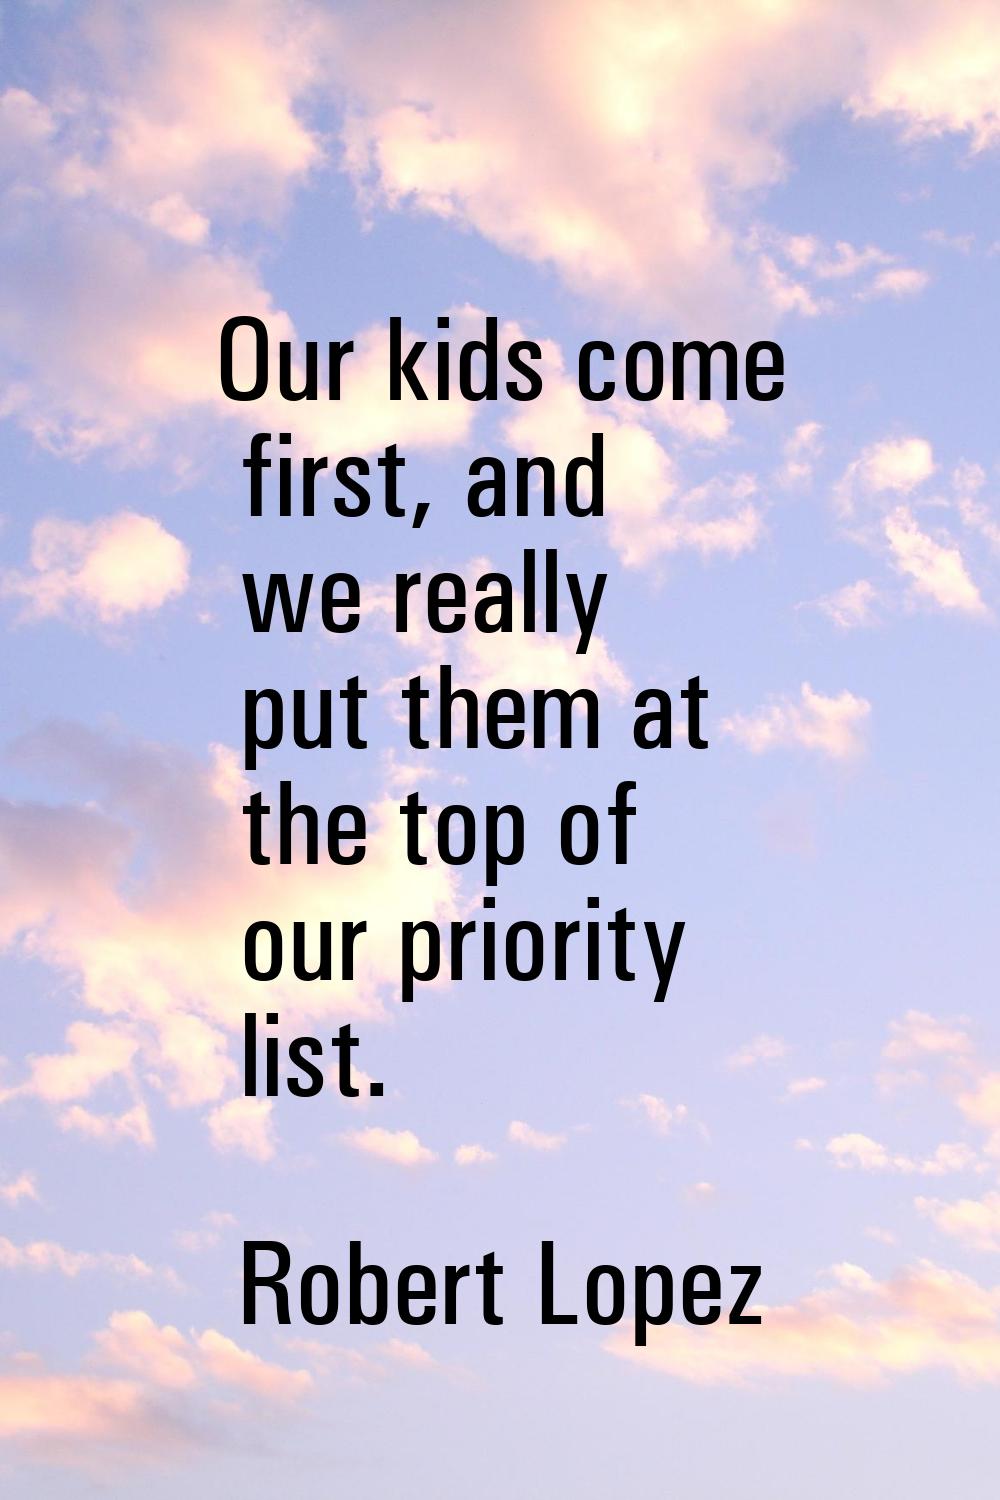 Our kids come first, and we really put them at the top of our priority list.